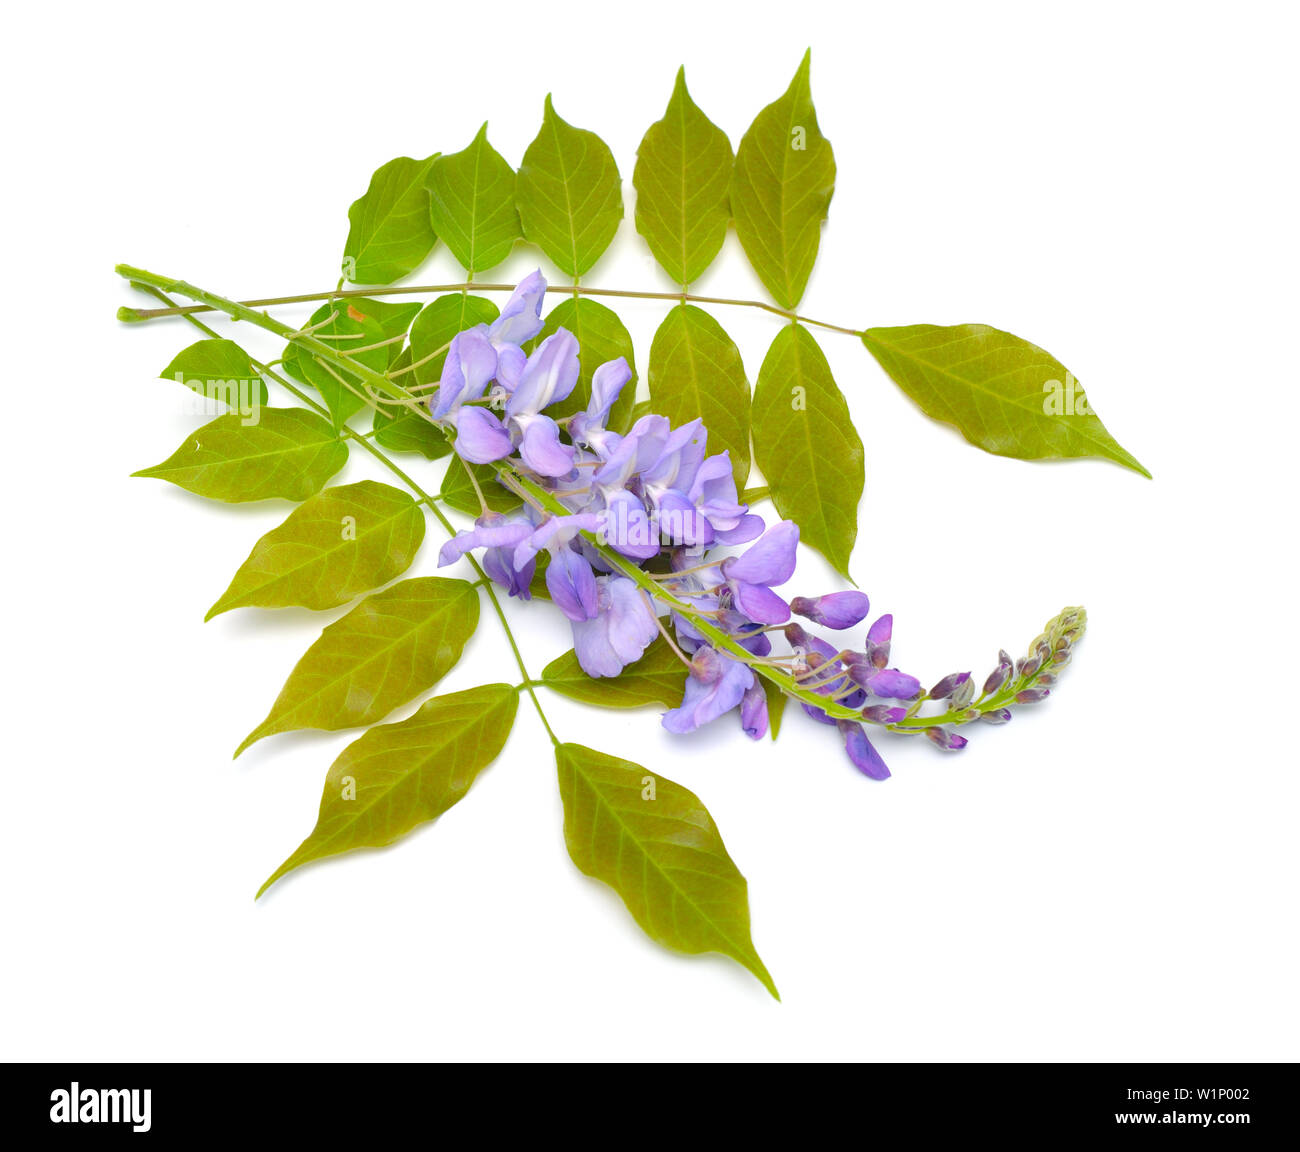 Wisteria sinensis or Chinese wisteria isolated on white background Stock Photo